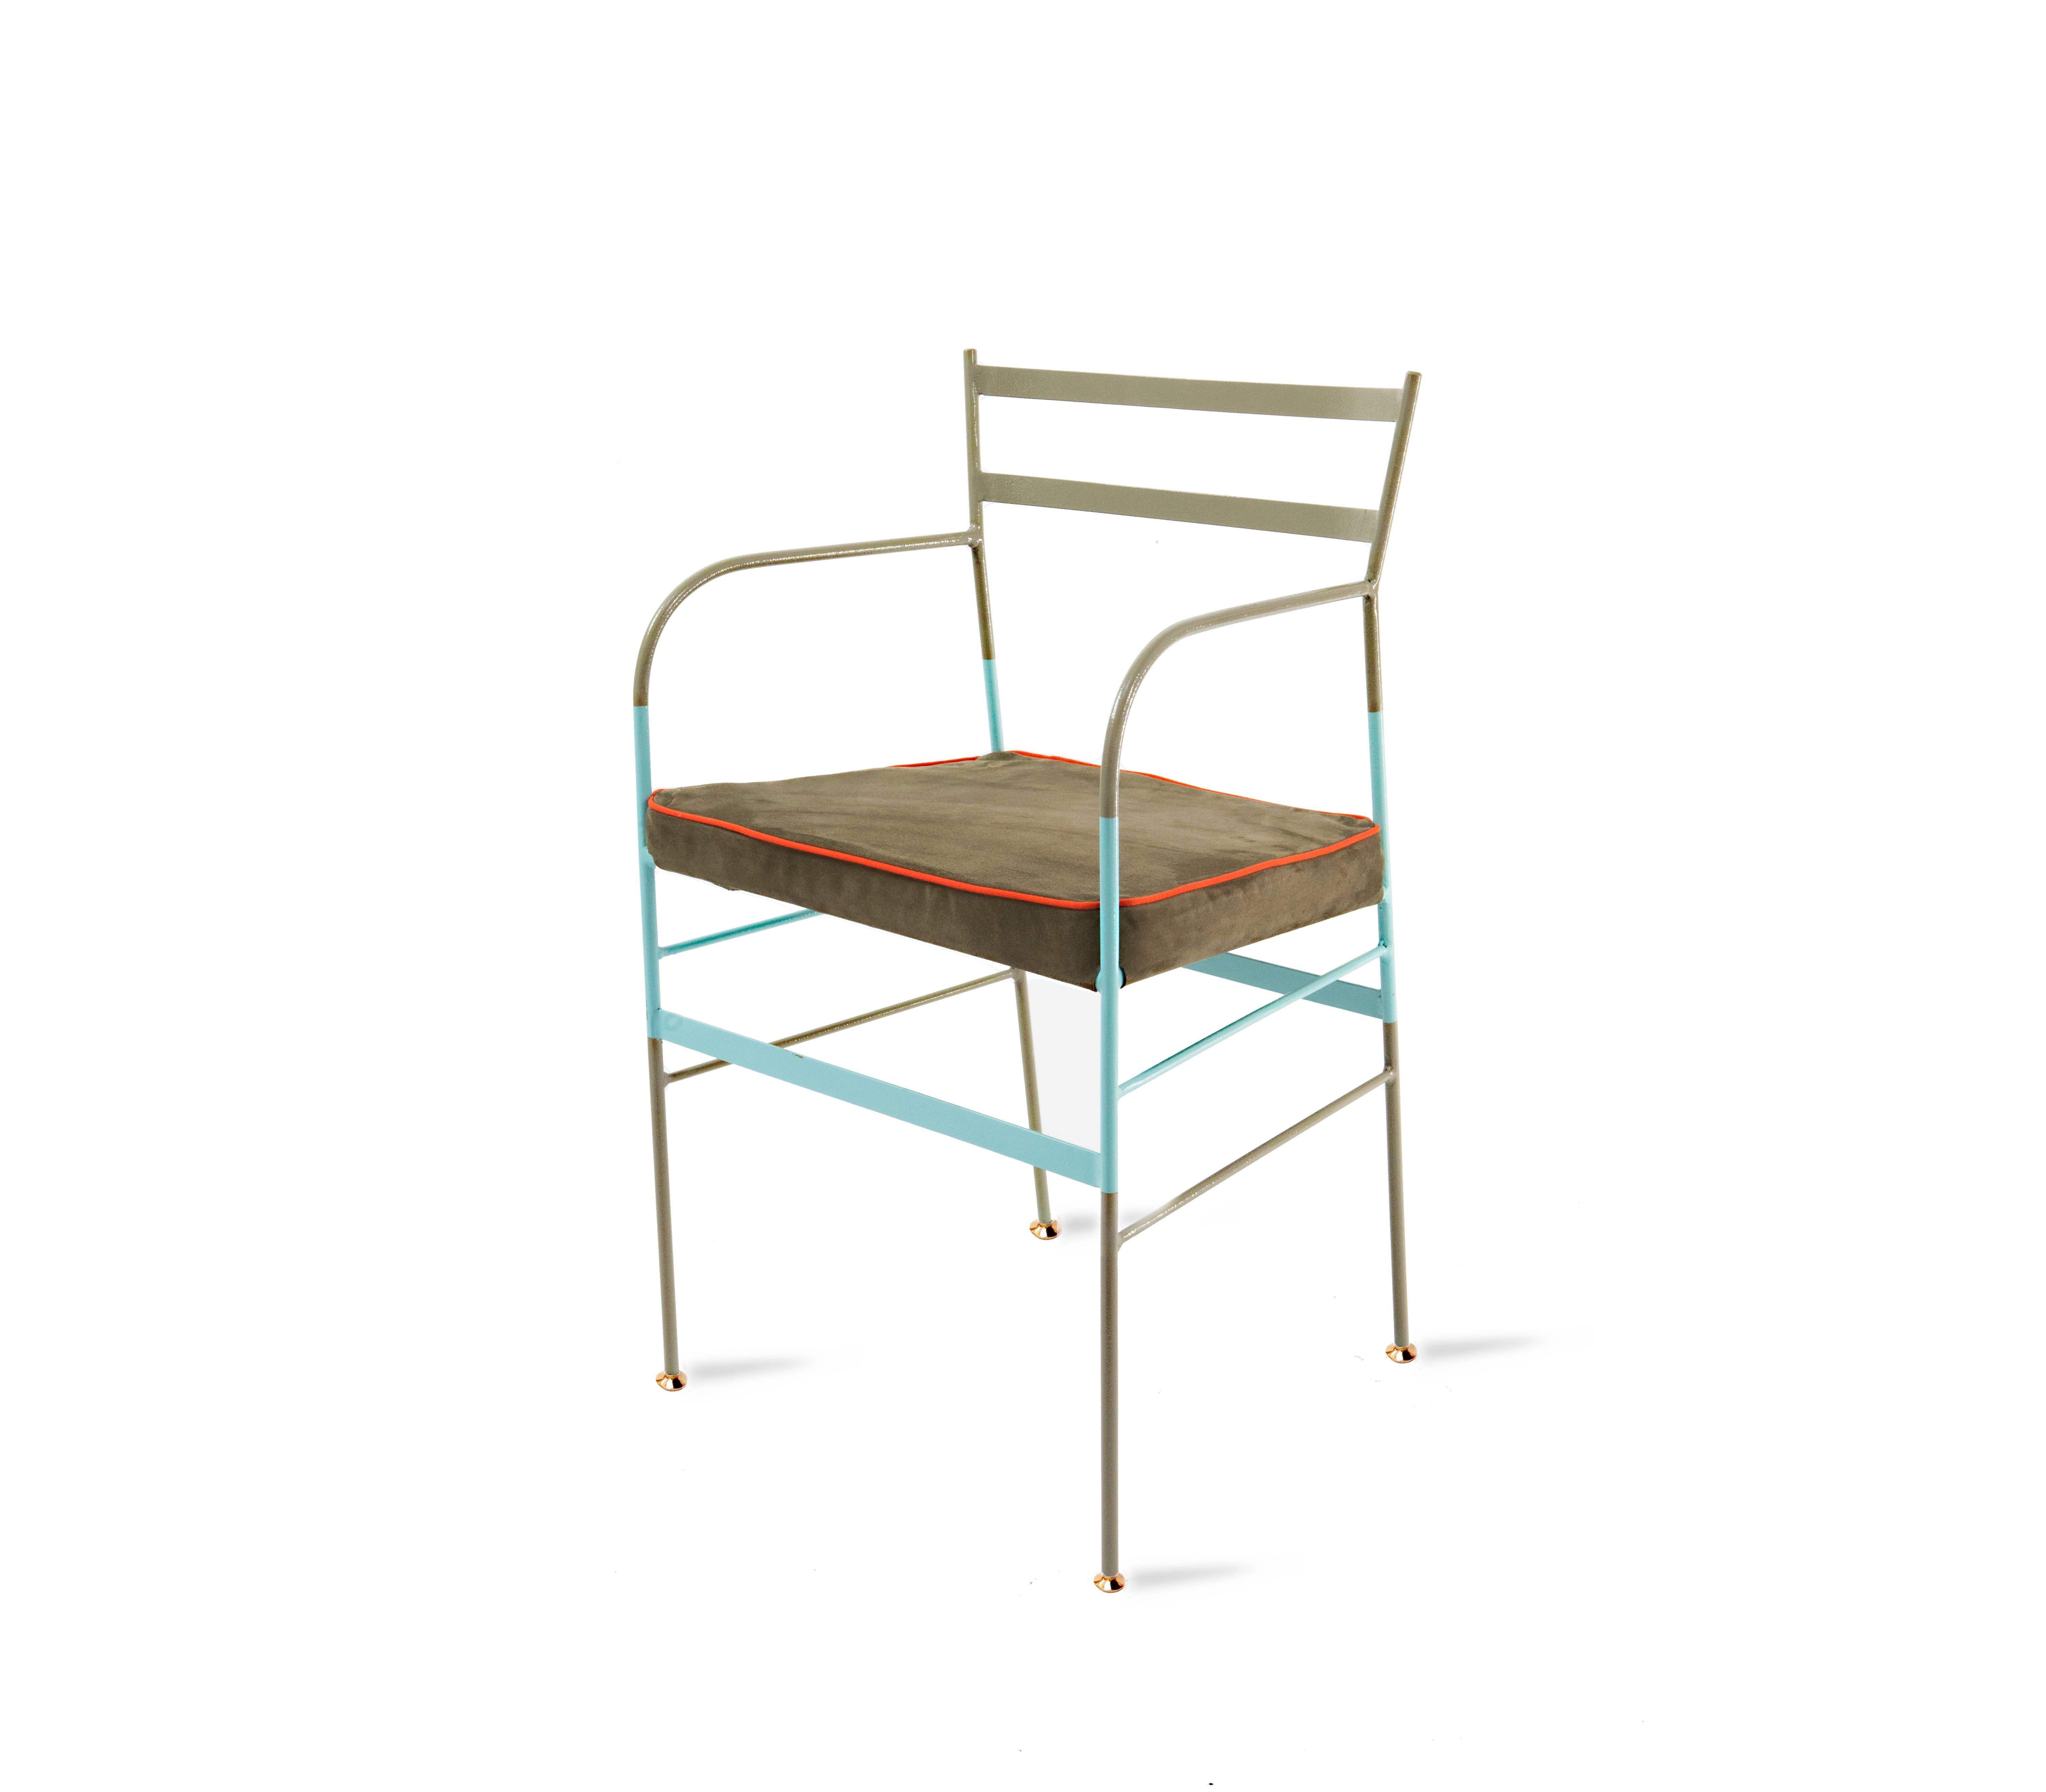 Bold piping on graceful tones of suede produces a neo-retro quality, finished with a uniquely organic compound paint and polish to prevent rust. Handcrafted in Italy from high-strength iron, these garden chairs by Sotow boast both style and